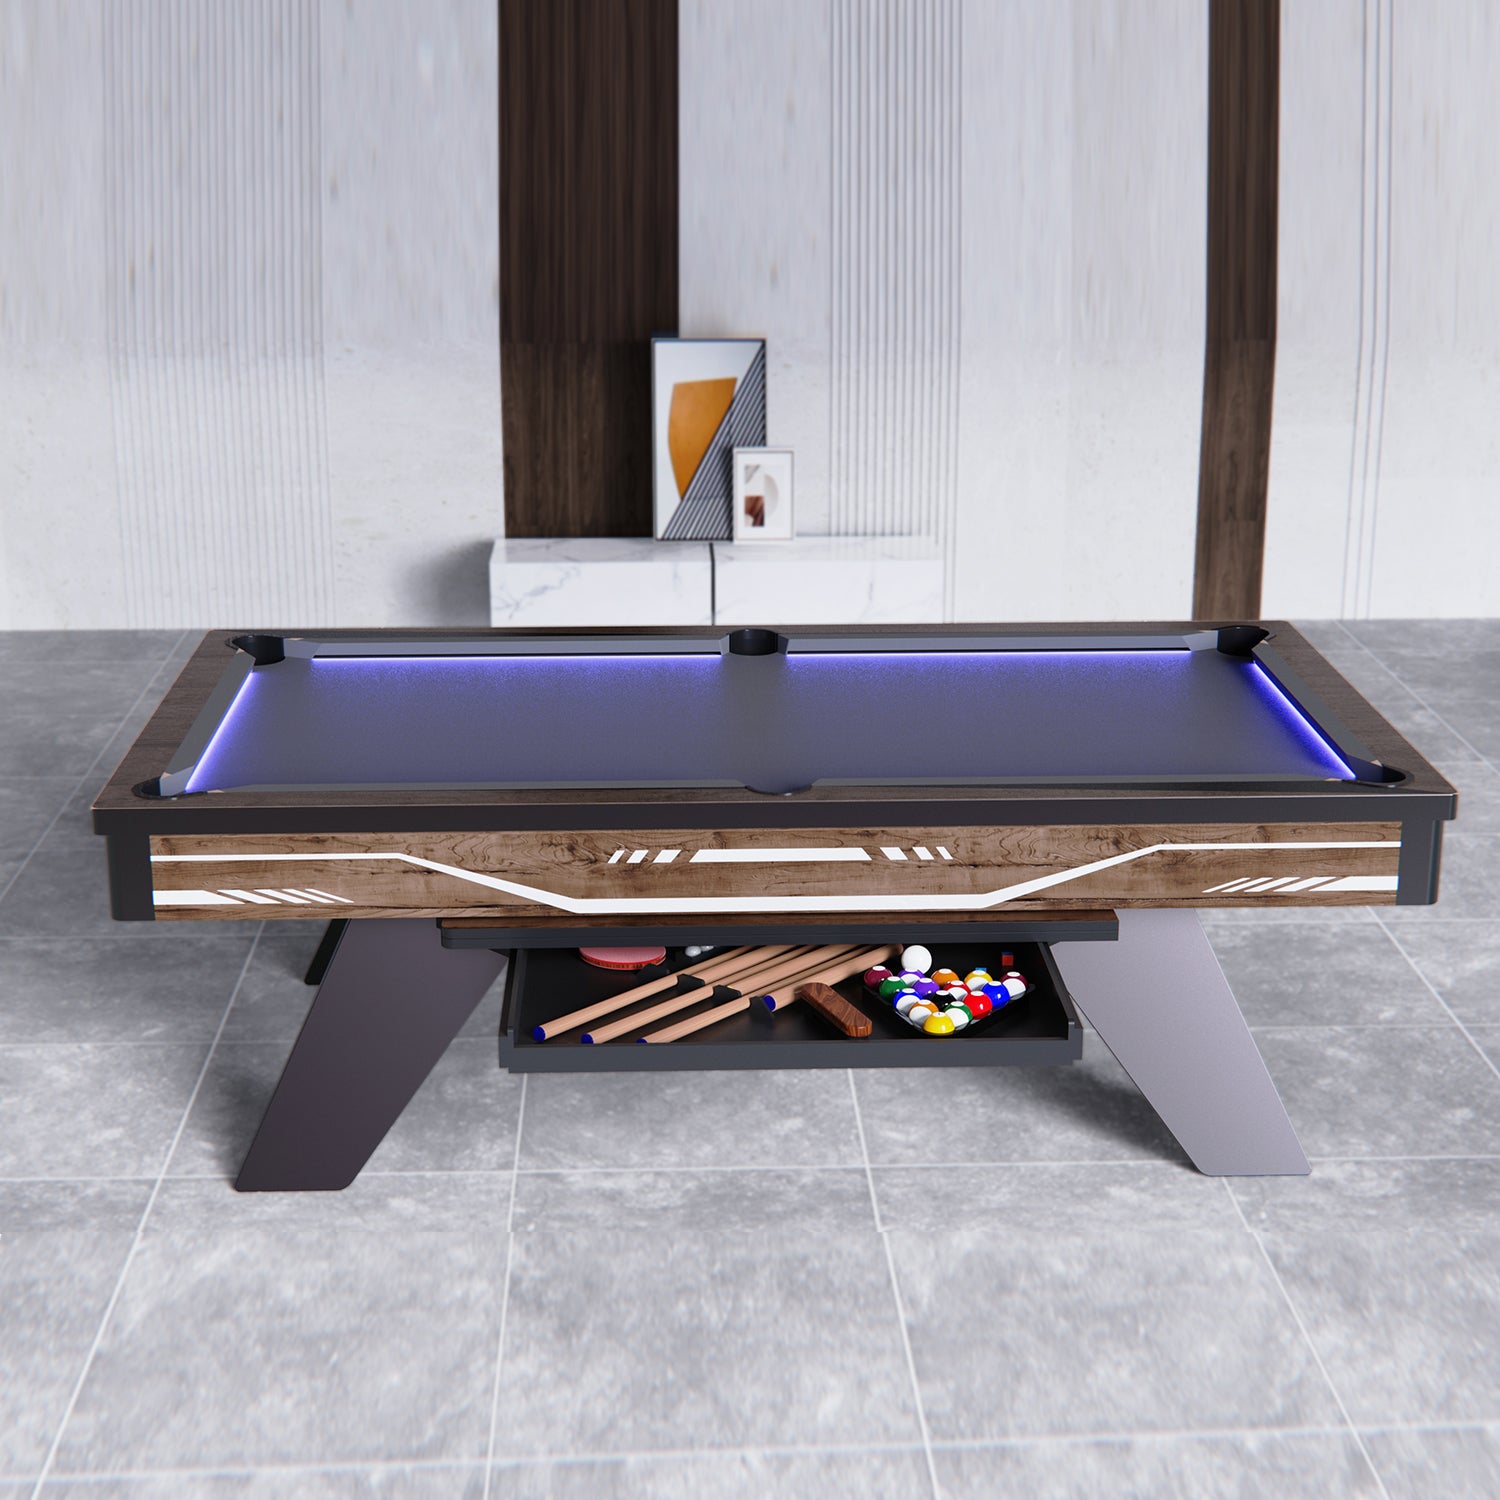 Cooma Dining/Office Pool Table-8FT 3IN1